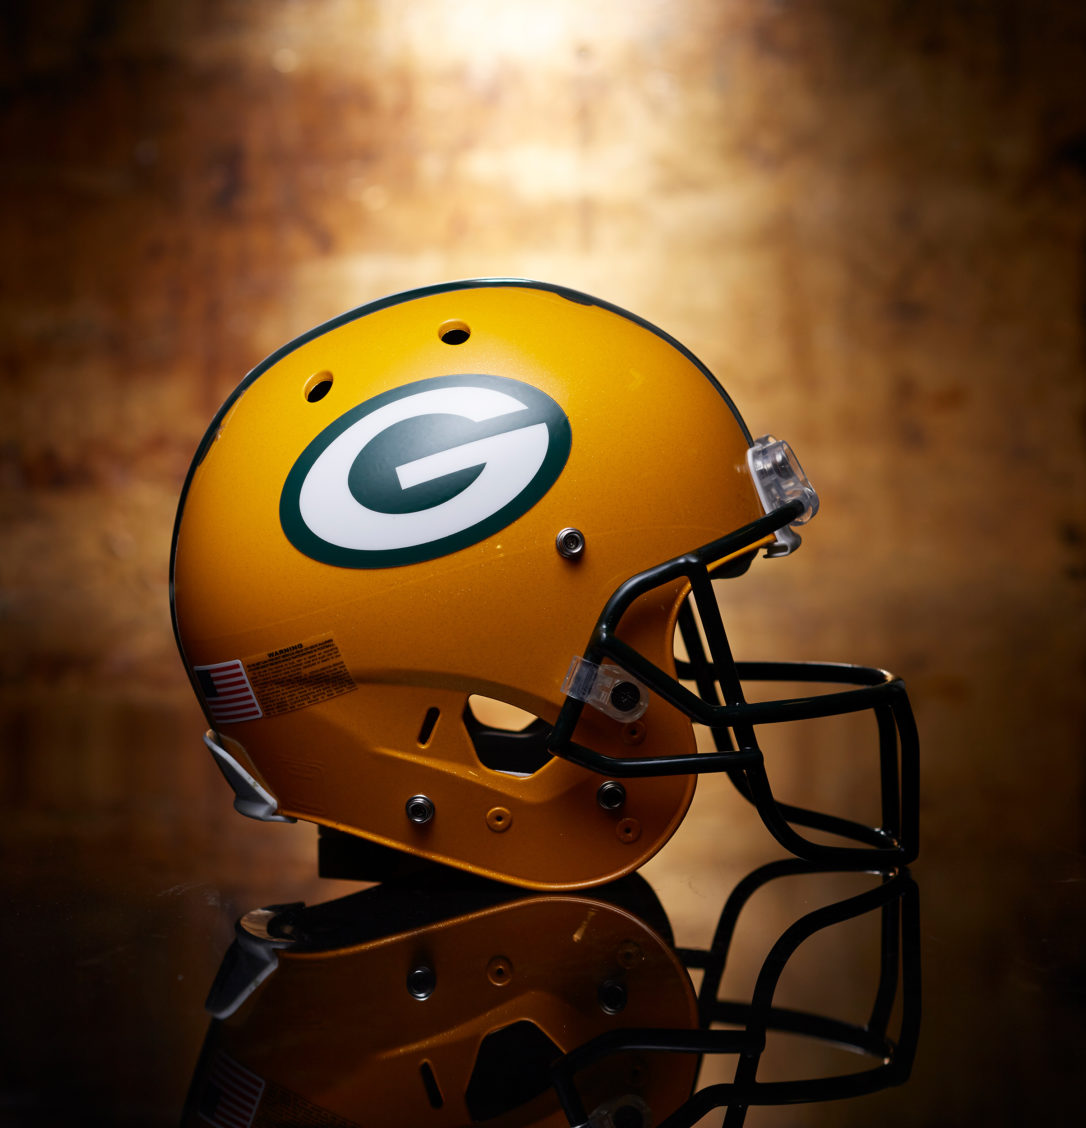 Product photography of a Green Bay Packers helmet.